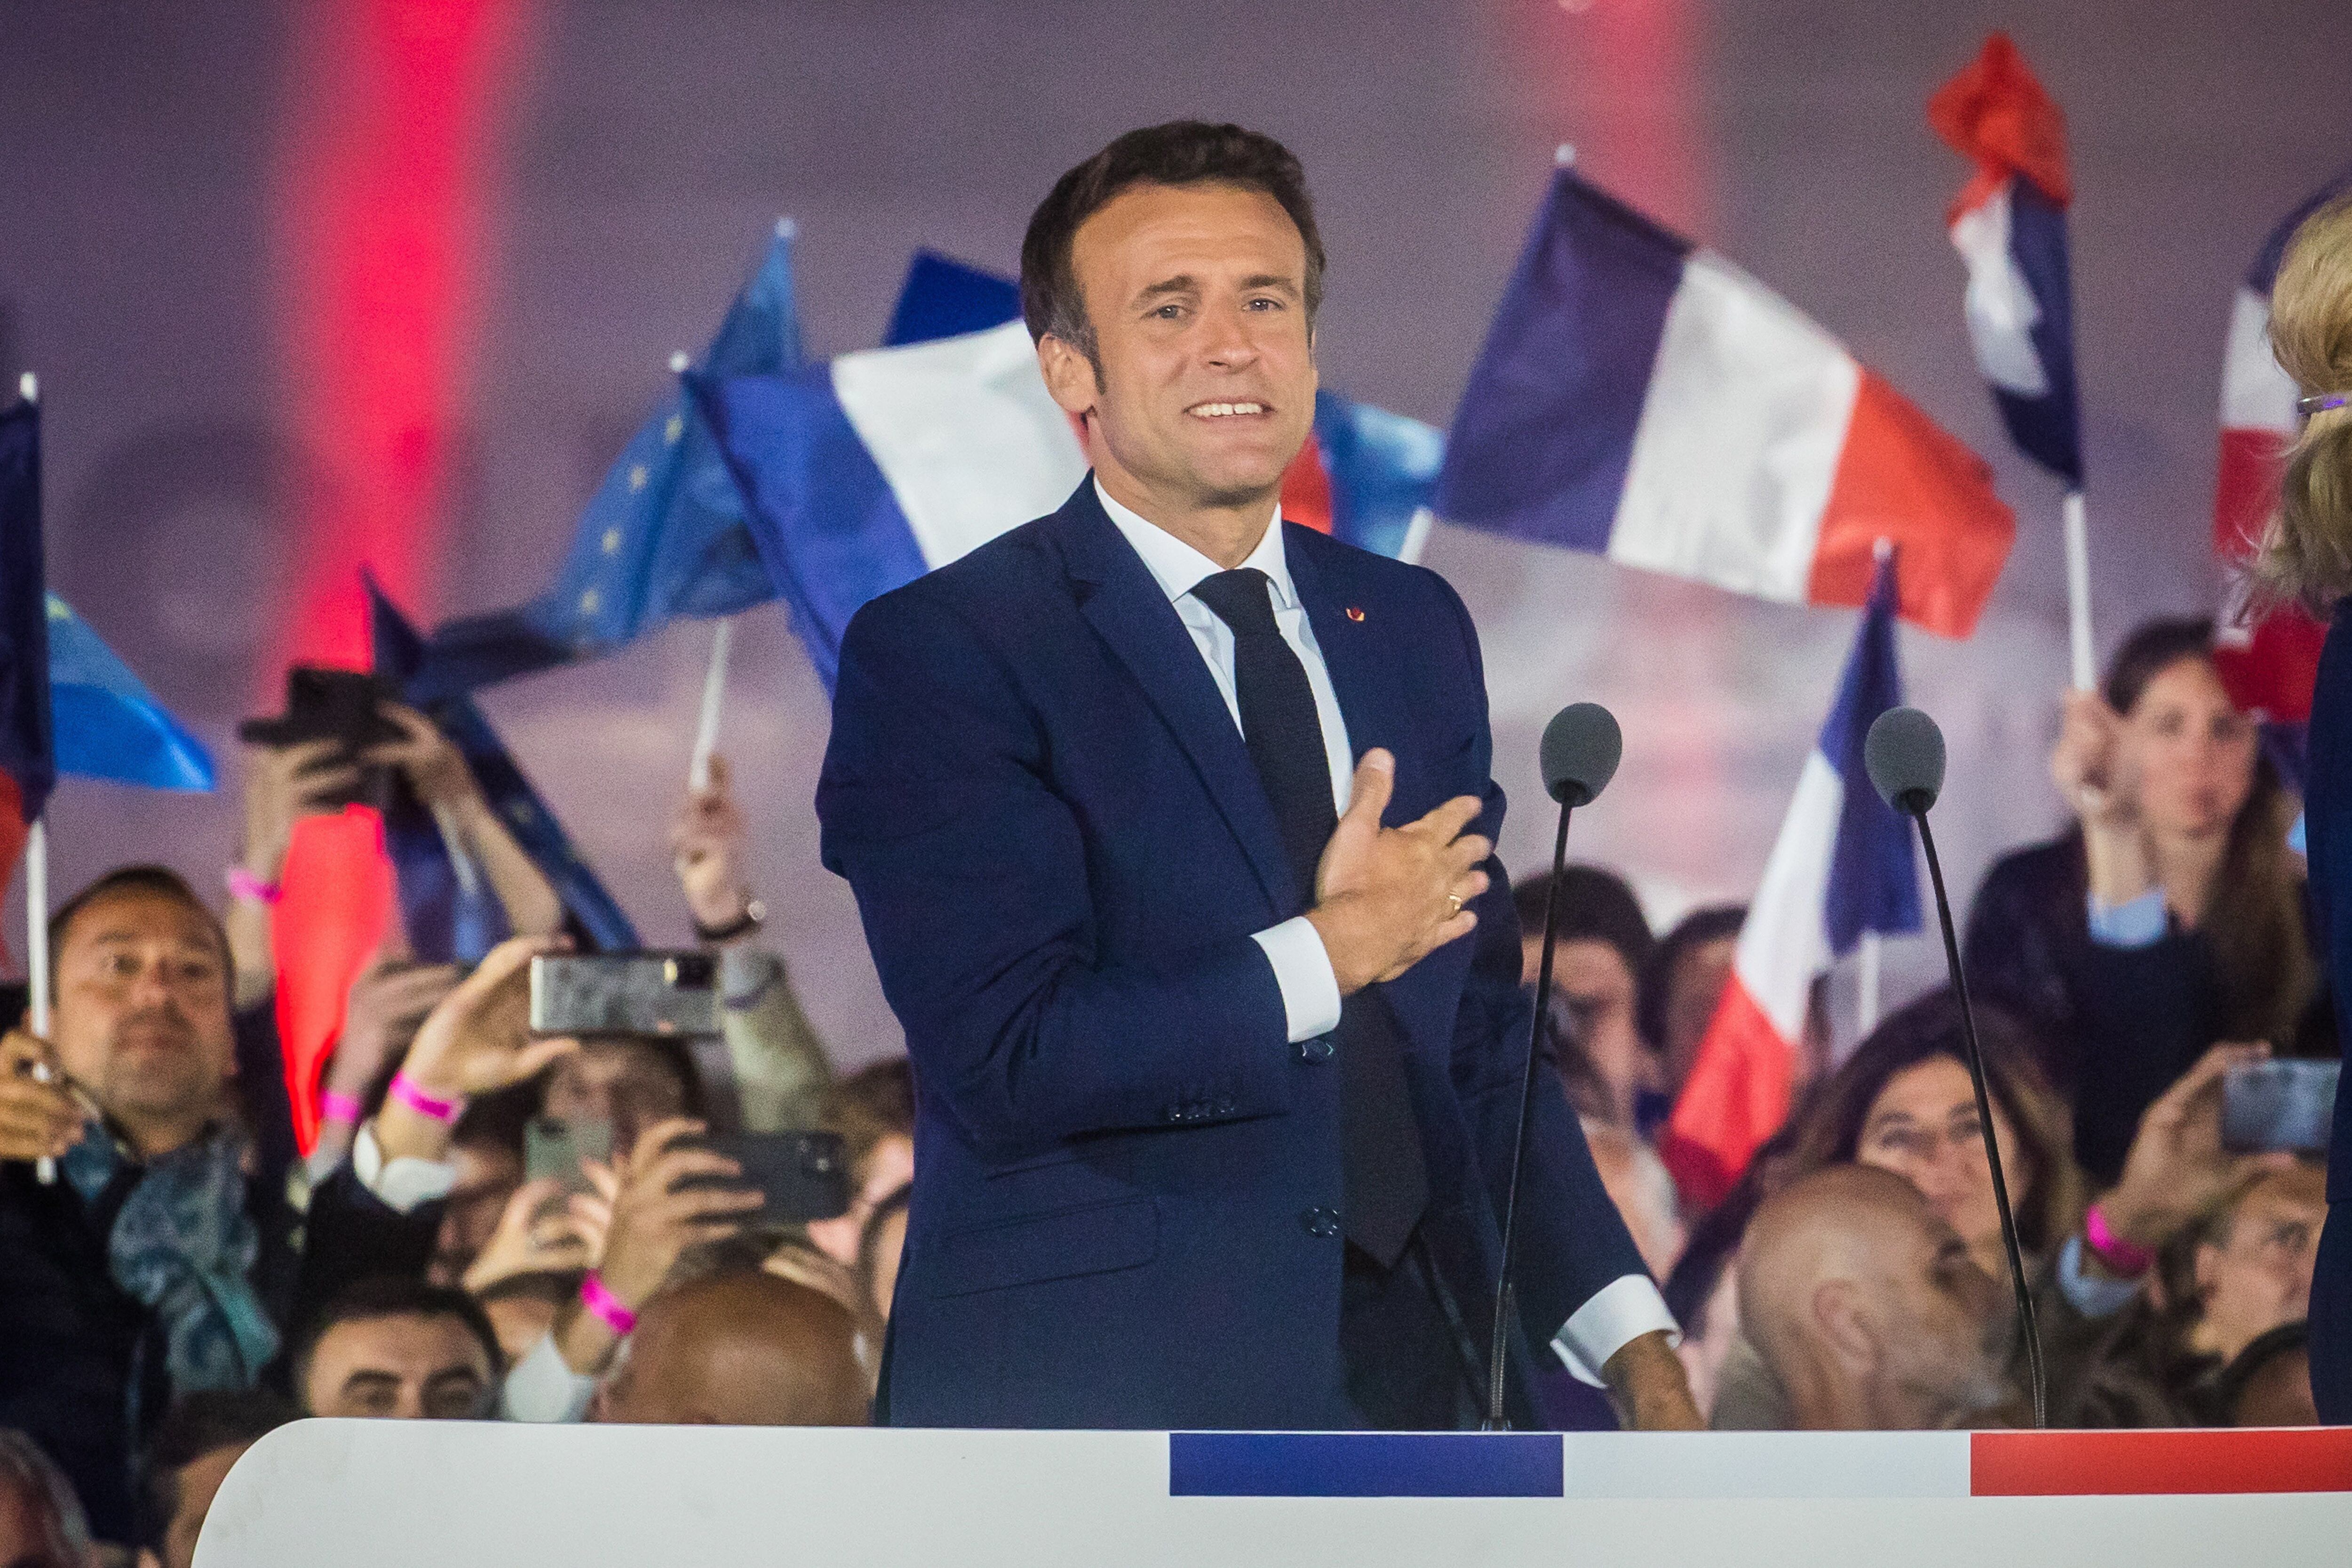 The president of France, Emmanuel Macron, has been in power since 2017. With this re-election he will stay until 2027. EFE